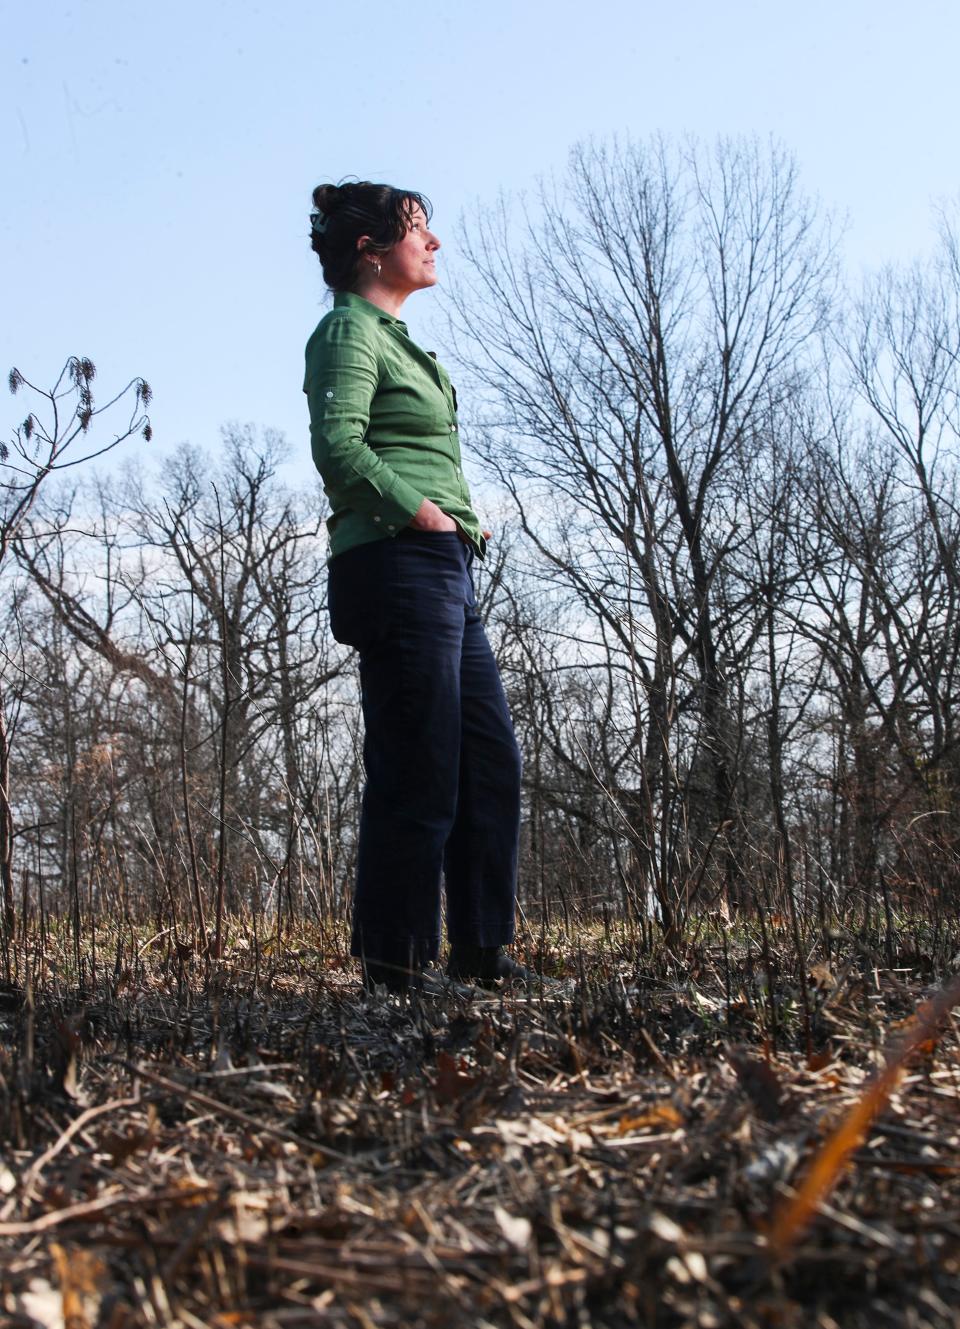 Liz Mortenson Winlock is the director of natural areas for the Olmsted Parks Conservancy. She's led many initiatives, such as goats grazing at Iroquois Park and the recent prescribed burn which will help temper invasive vegetation. Feb. 15, 2024